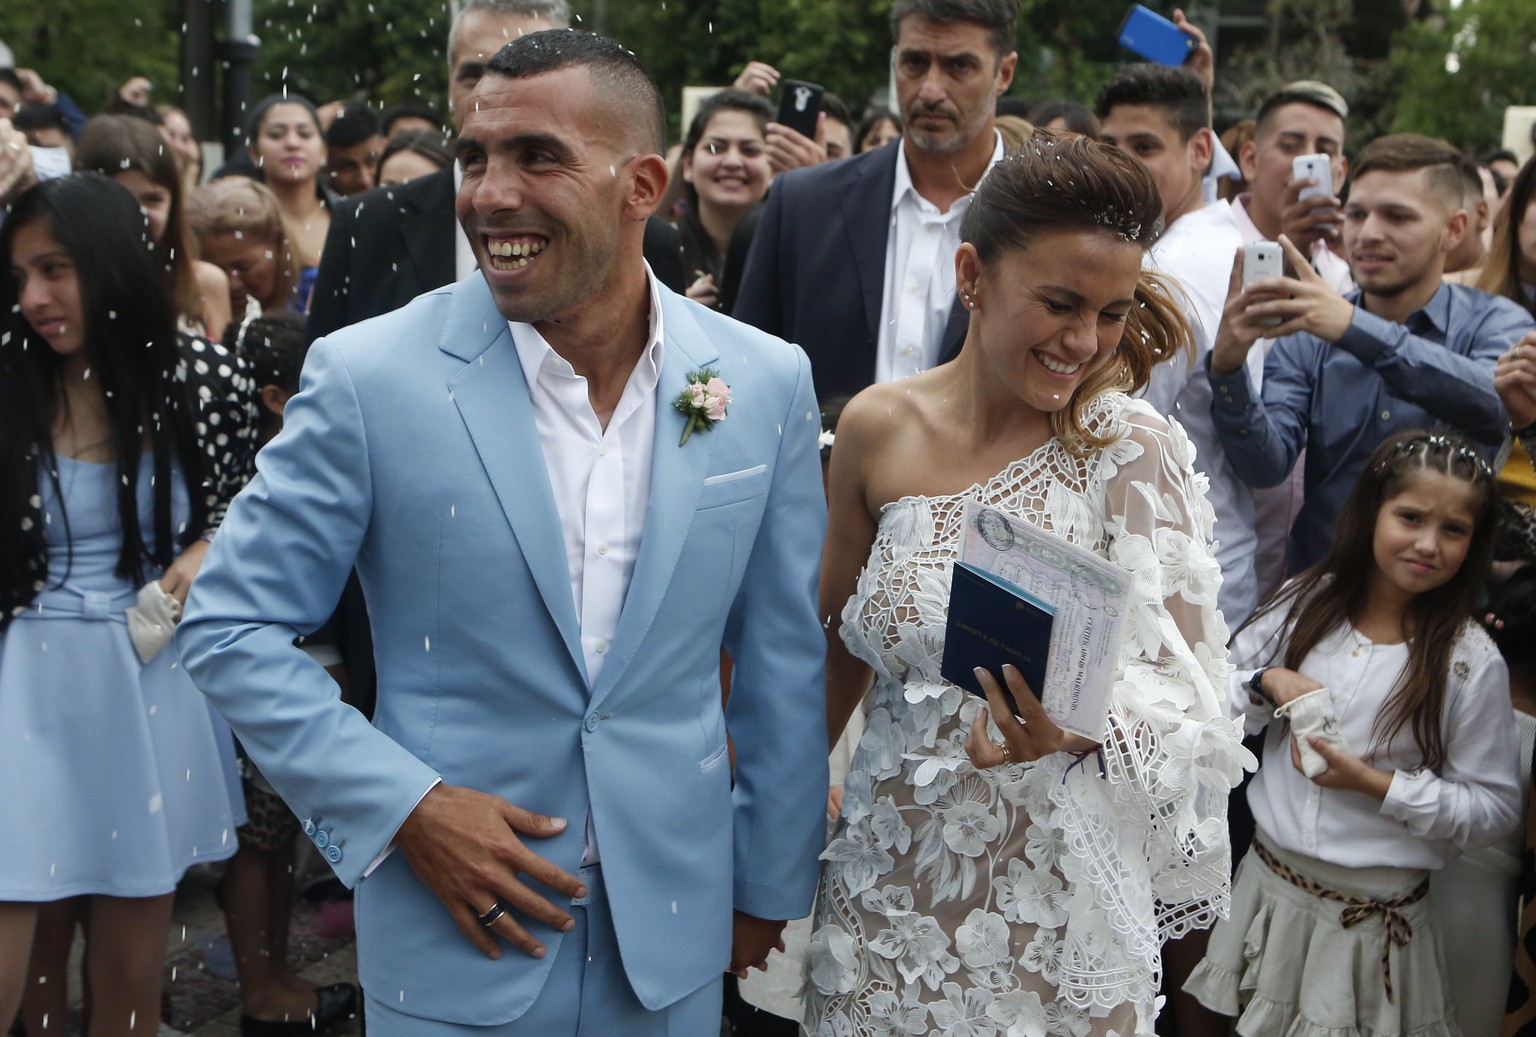 Soccer star Carlos Tevez and his wife Vanesa Mansilla exit the church after getting married in in Buenos Aires, Argentina, Thursday, Dec. 22, 2016. (AP Photo/Luciano Matteazzi)